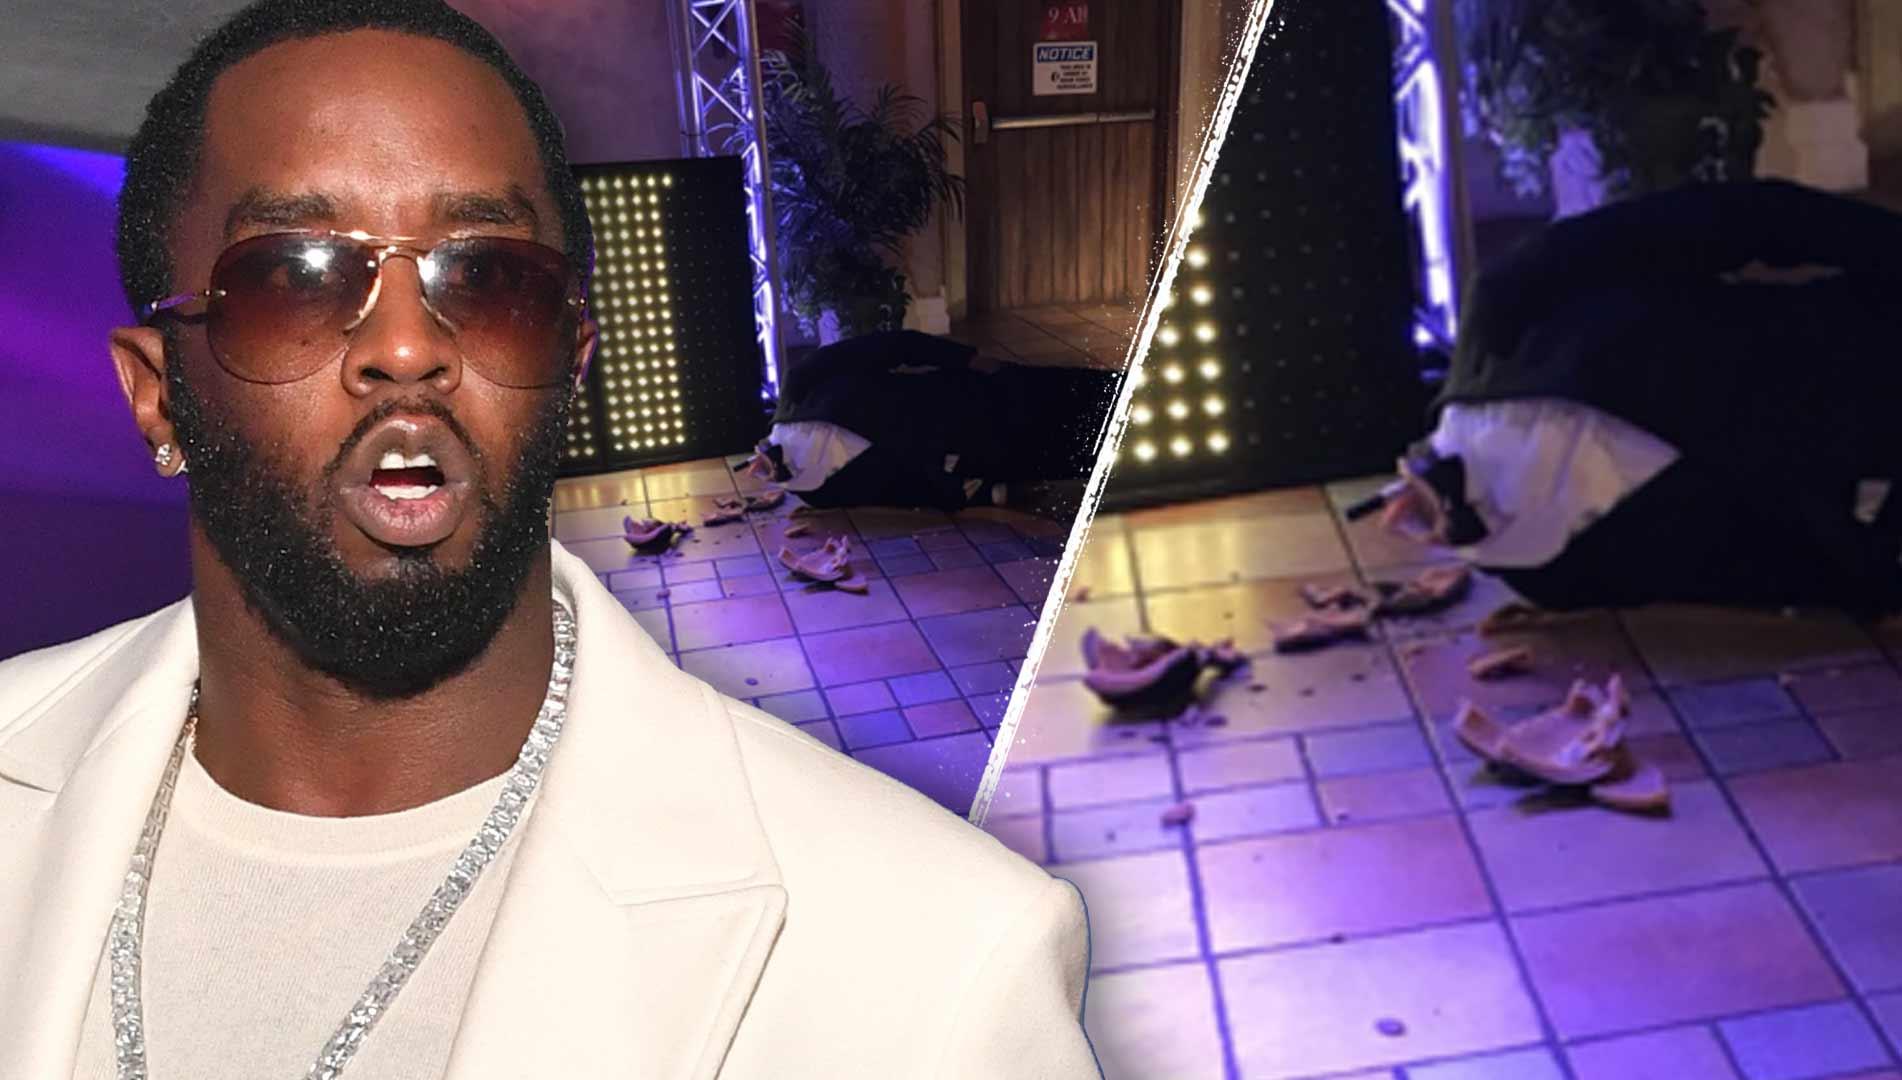 Diddy’s Decapitated Wax Statue Seen With Crushed Head